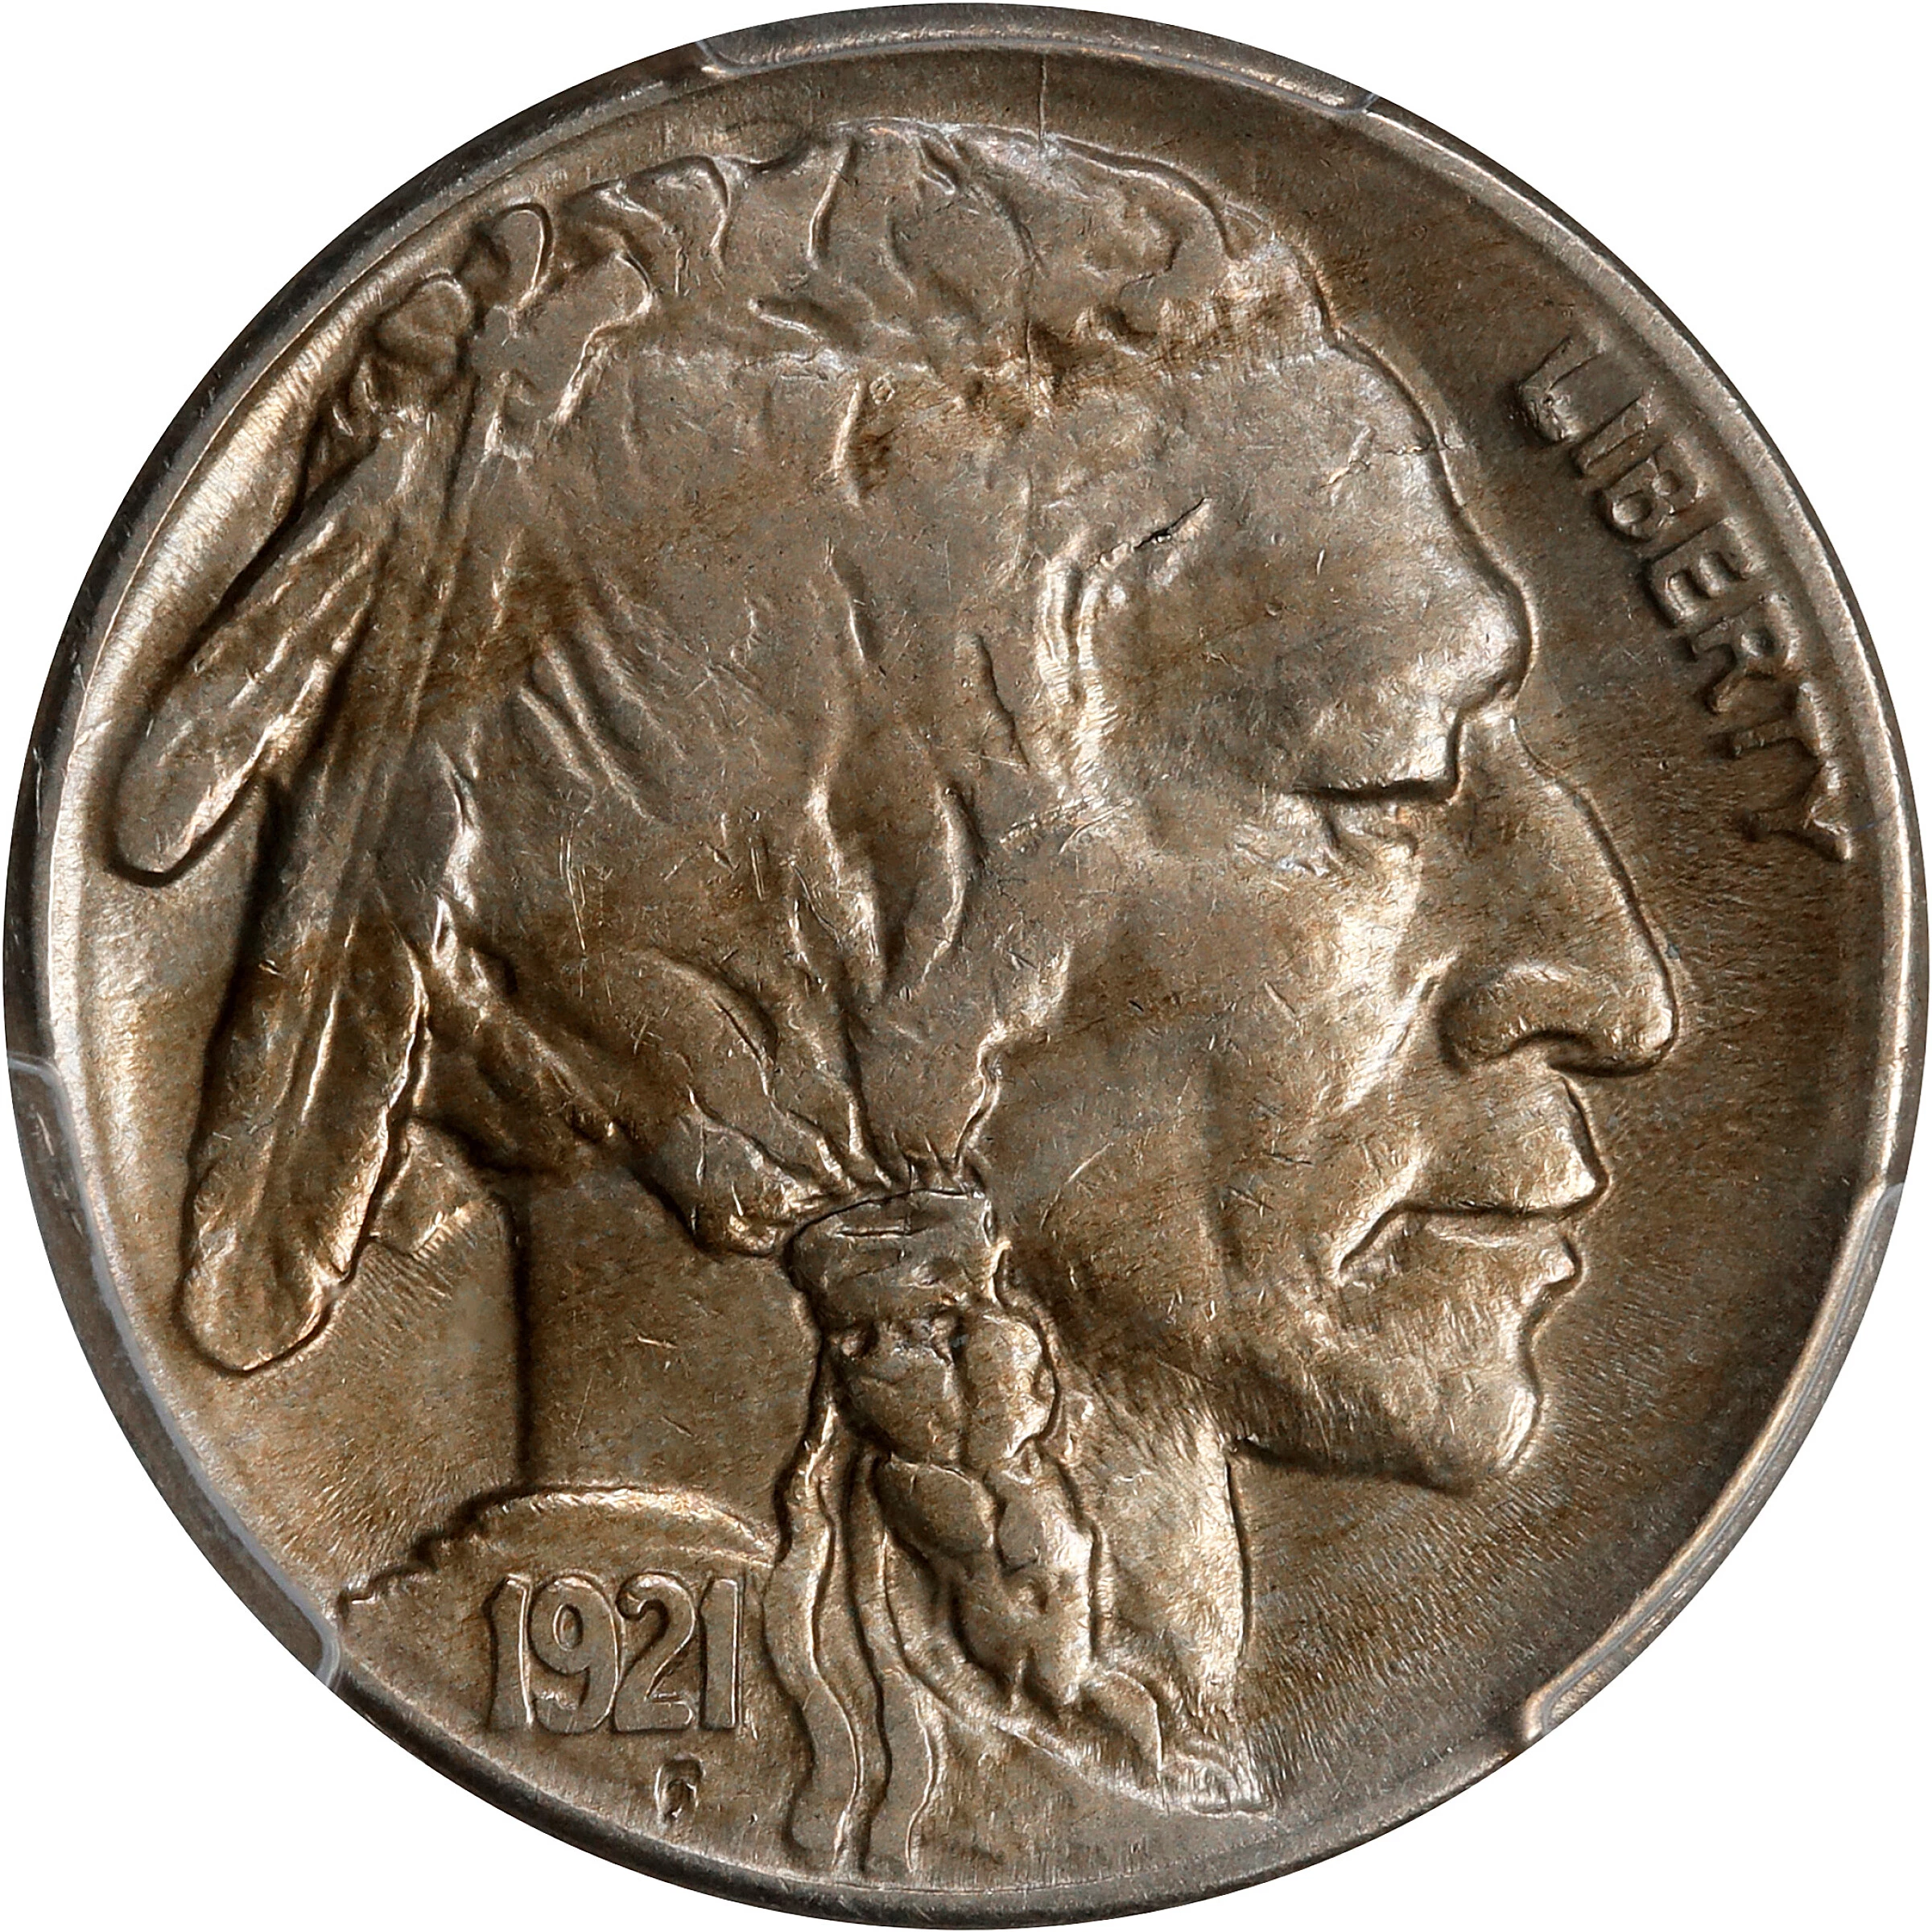 1920 and 1921 U.S. Indian Head Buffalo Nickels - Nice Detail - 2 Coins